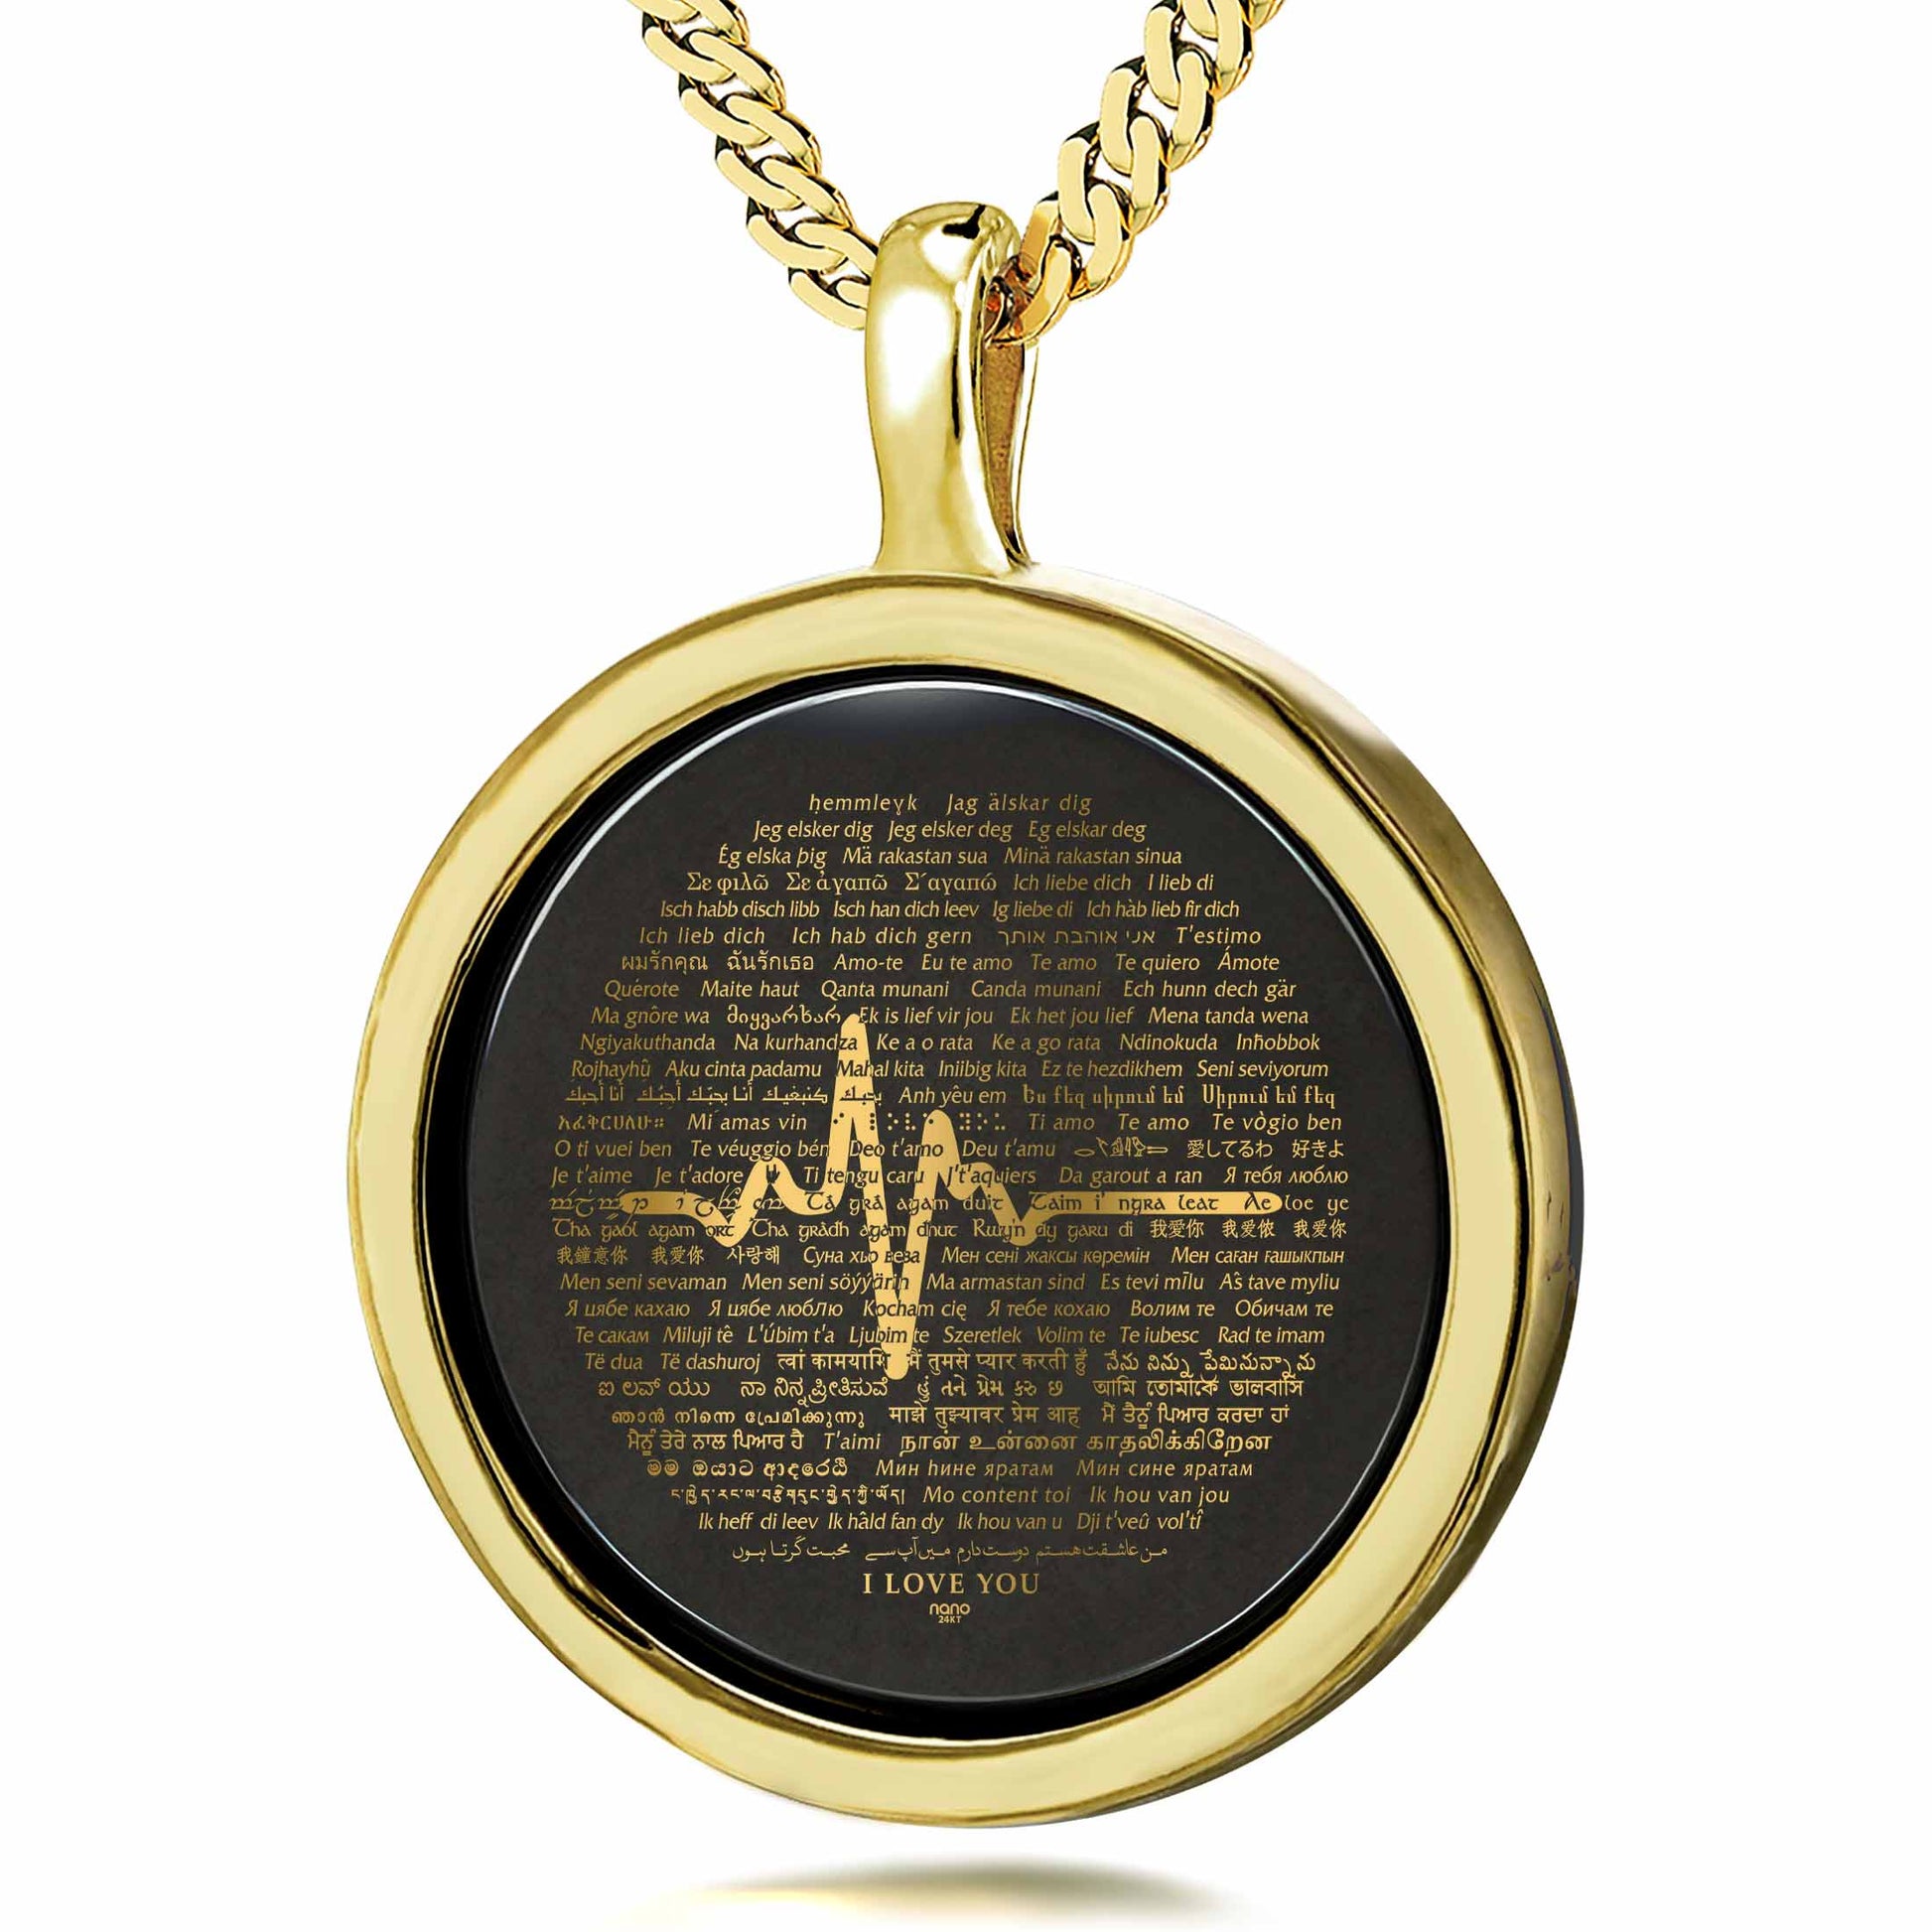 His Heartbeat of Love Necklace Over 100 Languages I Love You Pendant 14k Yellow Gold